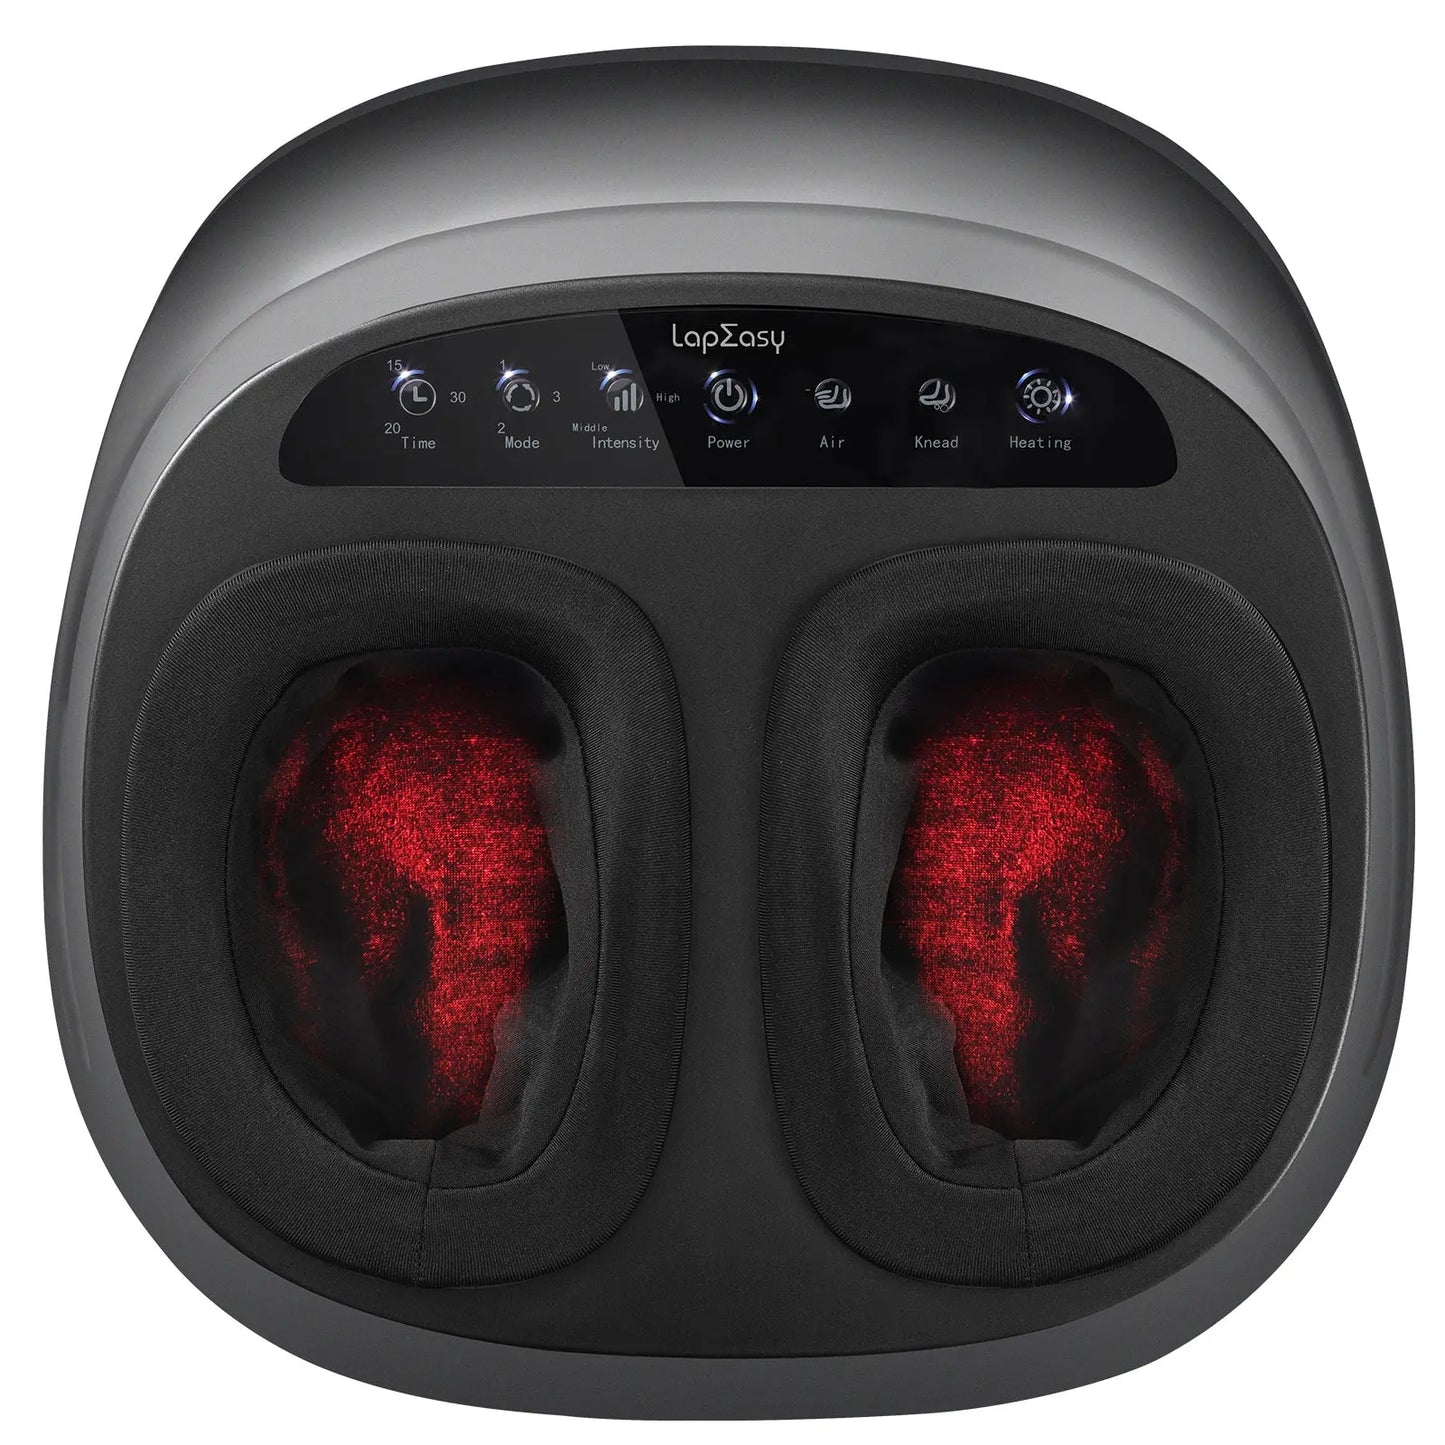 Foot Massager Machine With Heat And Massage Gifts For Men And Women - Trending's Arena Beauty Foot Massager Machine With Heat And Massage Gifts For Men And Women Foot Messager Black